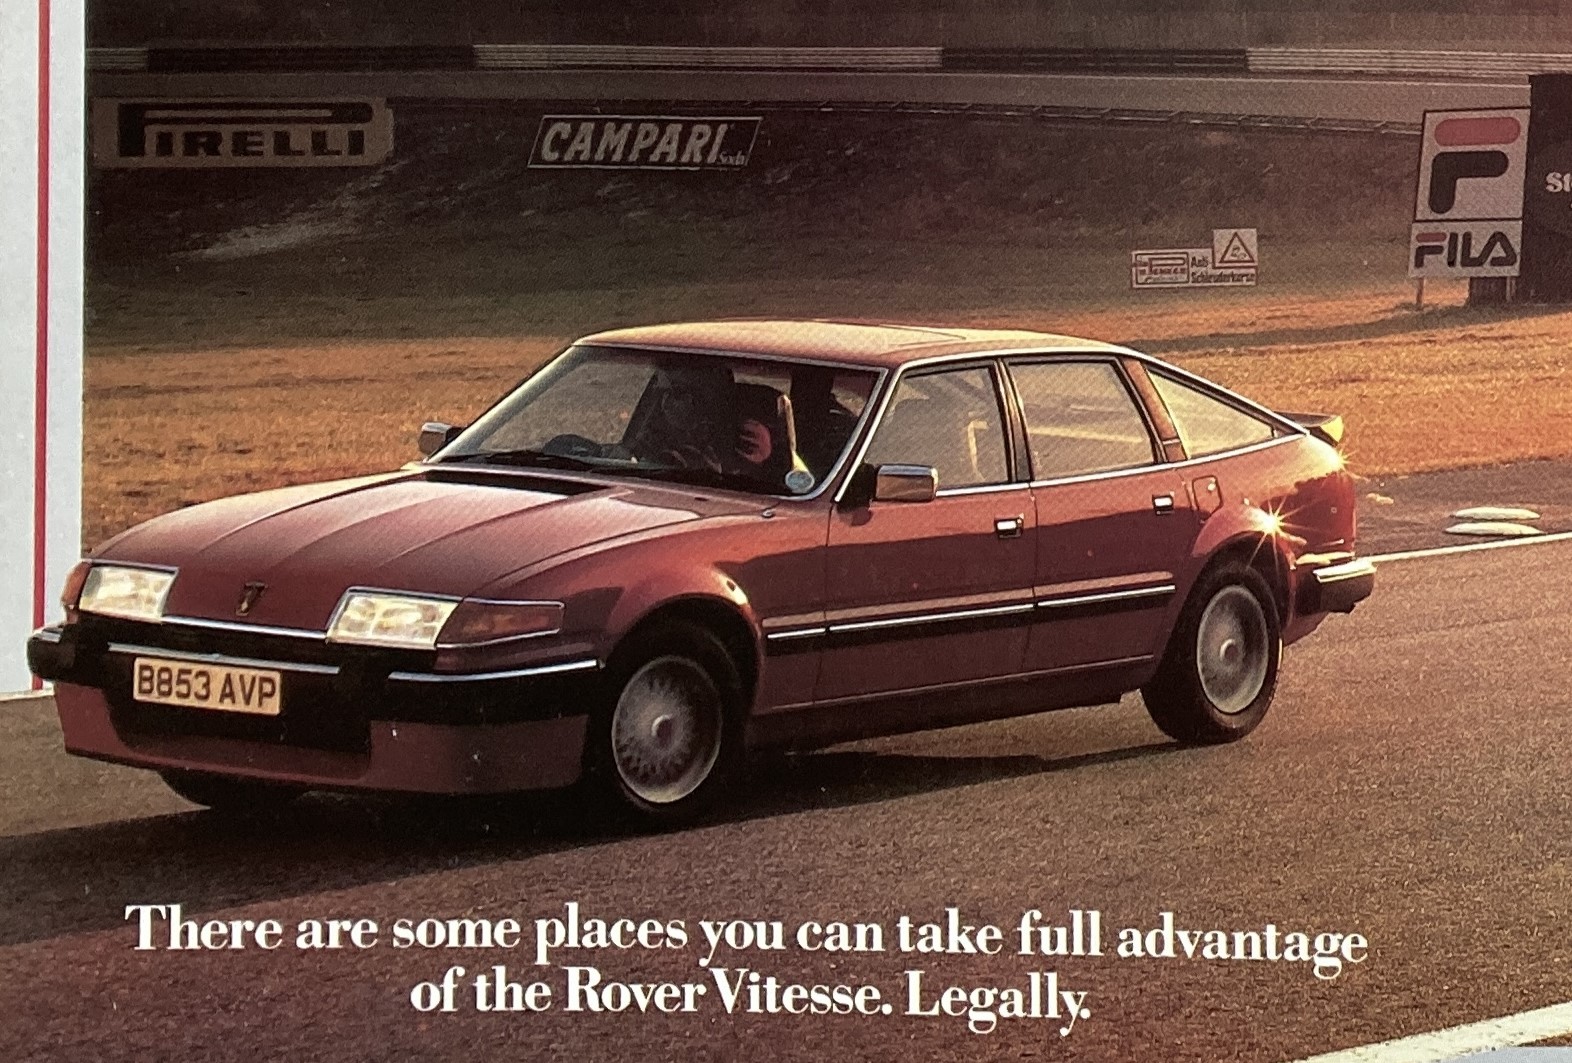 Ad Break: The Rover Vitesse tempted you to take it to a faraway track